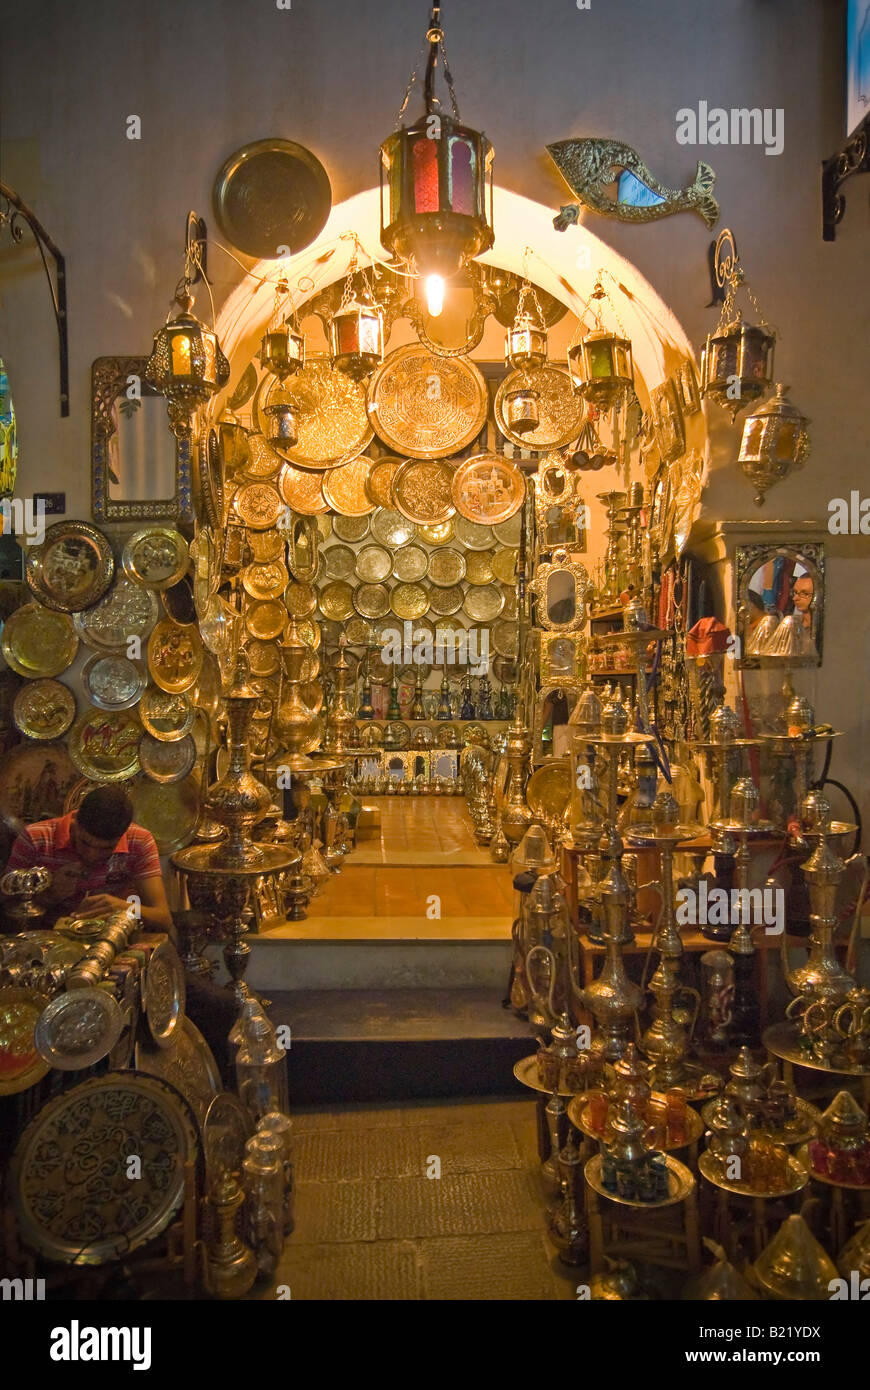 Vertical night time view outside of a traditional Tunisian metalwork shop packed full of brass plates, teapots and lanterns Stock Photo